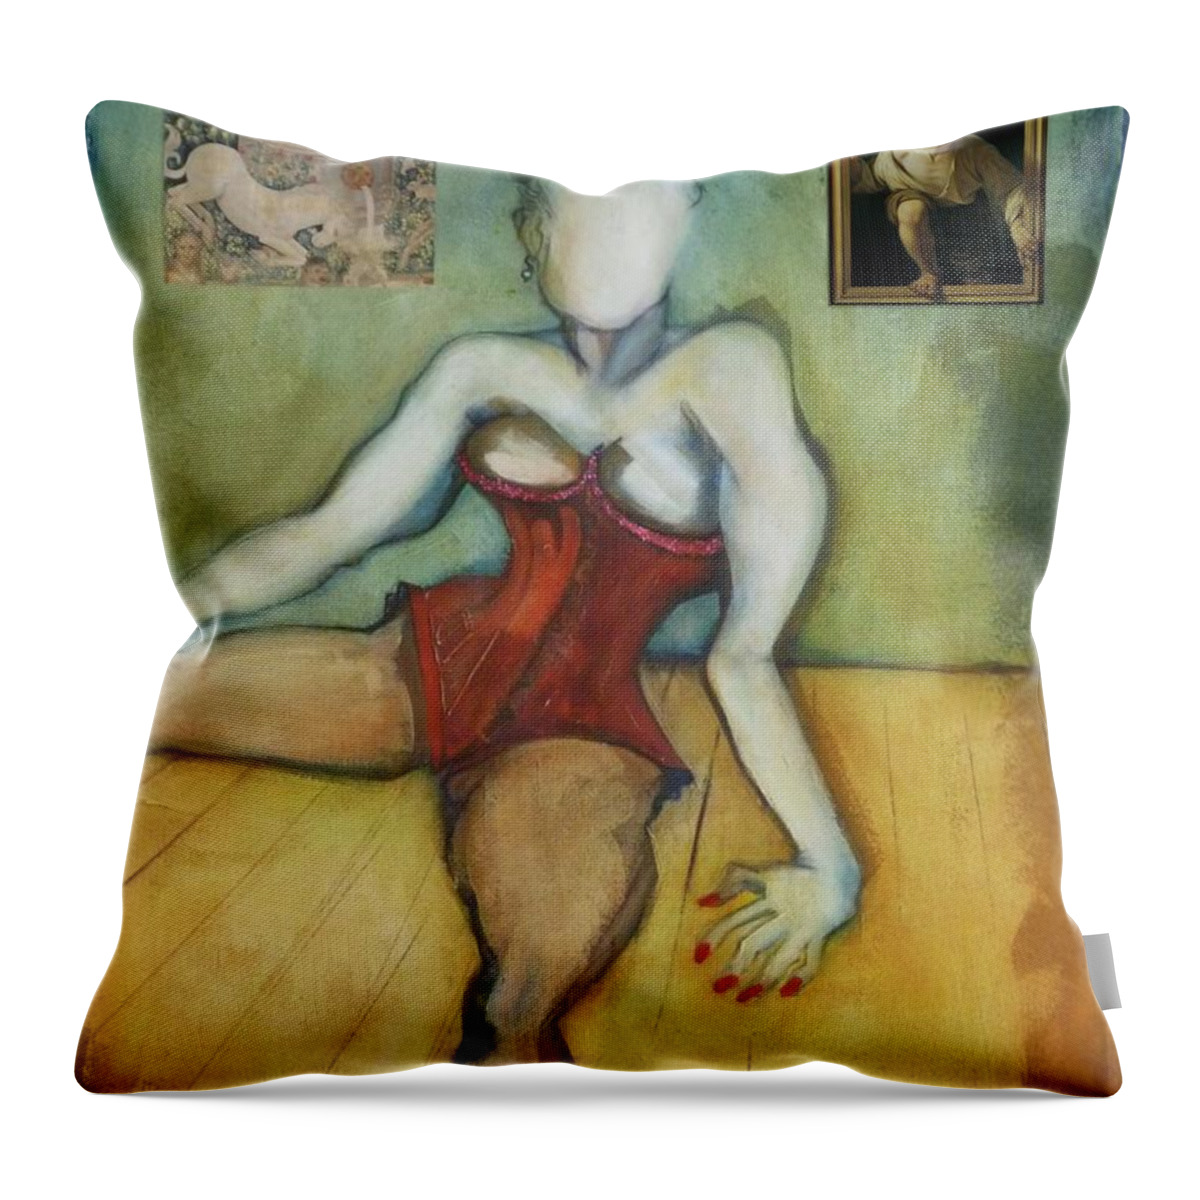 Burlesque Throw Pillow featuring the painting Chin Chin With an Imaginary Bird on Her Head by Carolyn Weltman